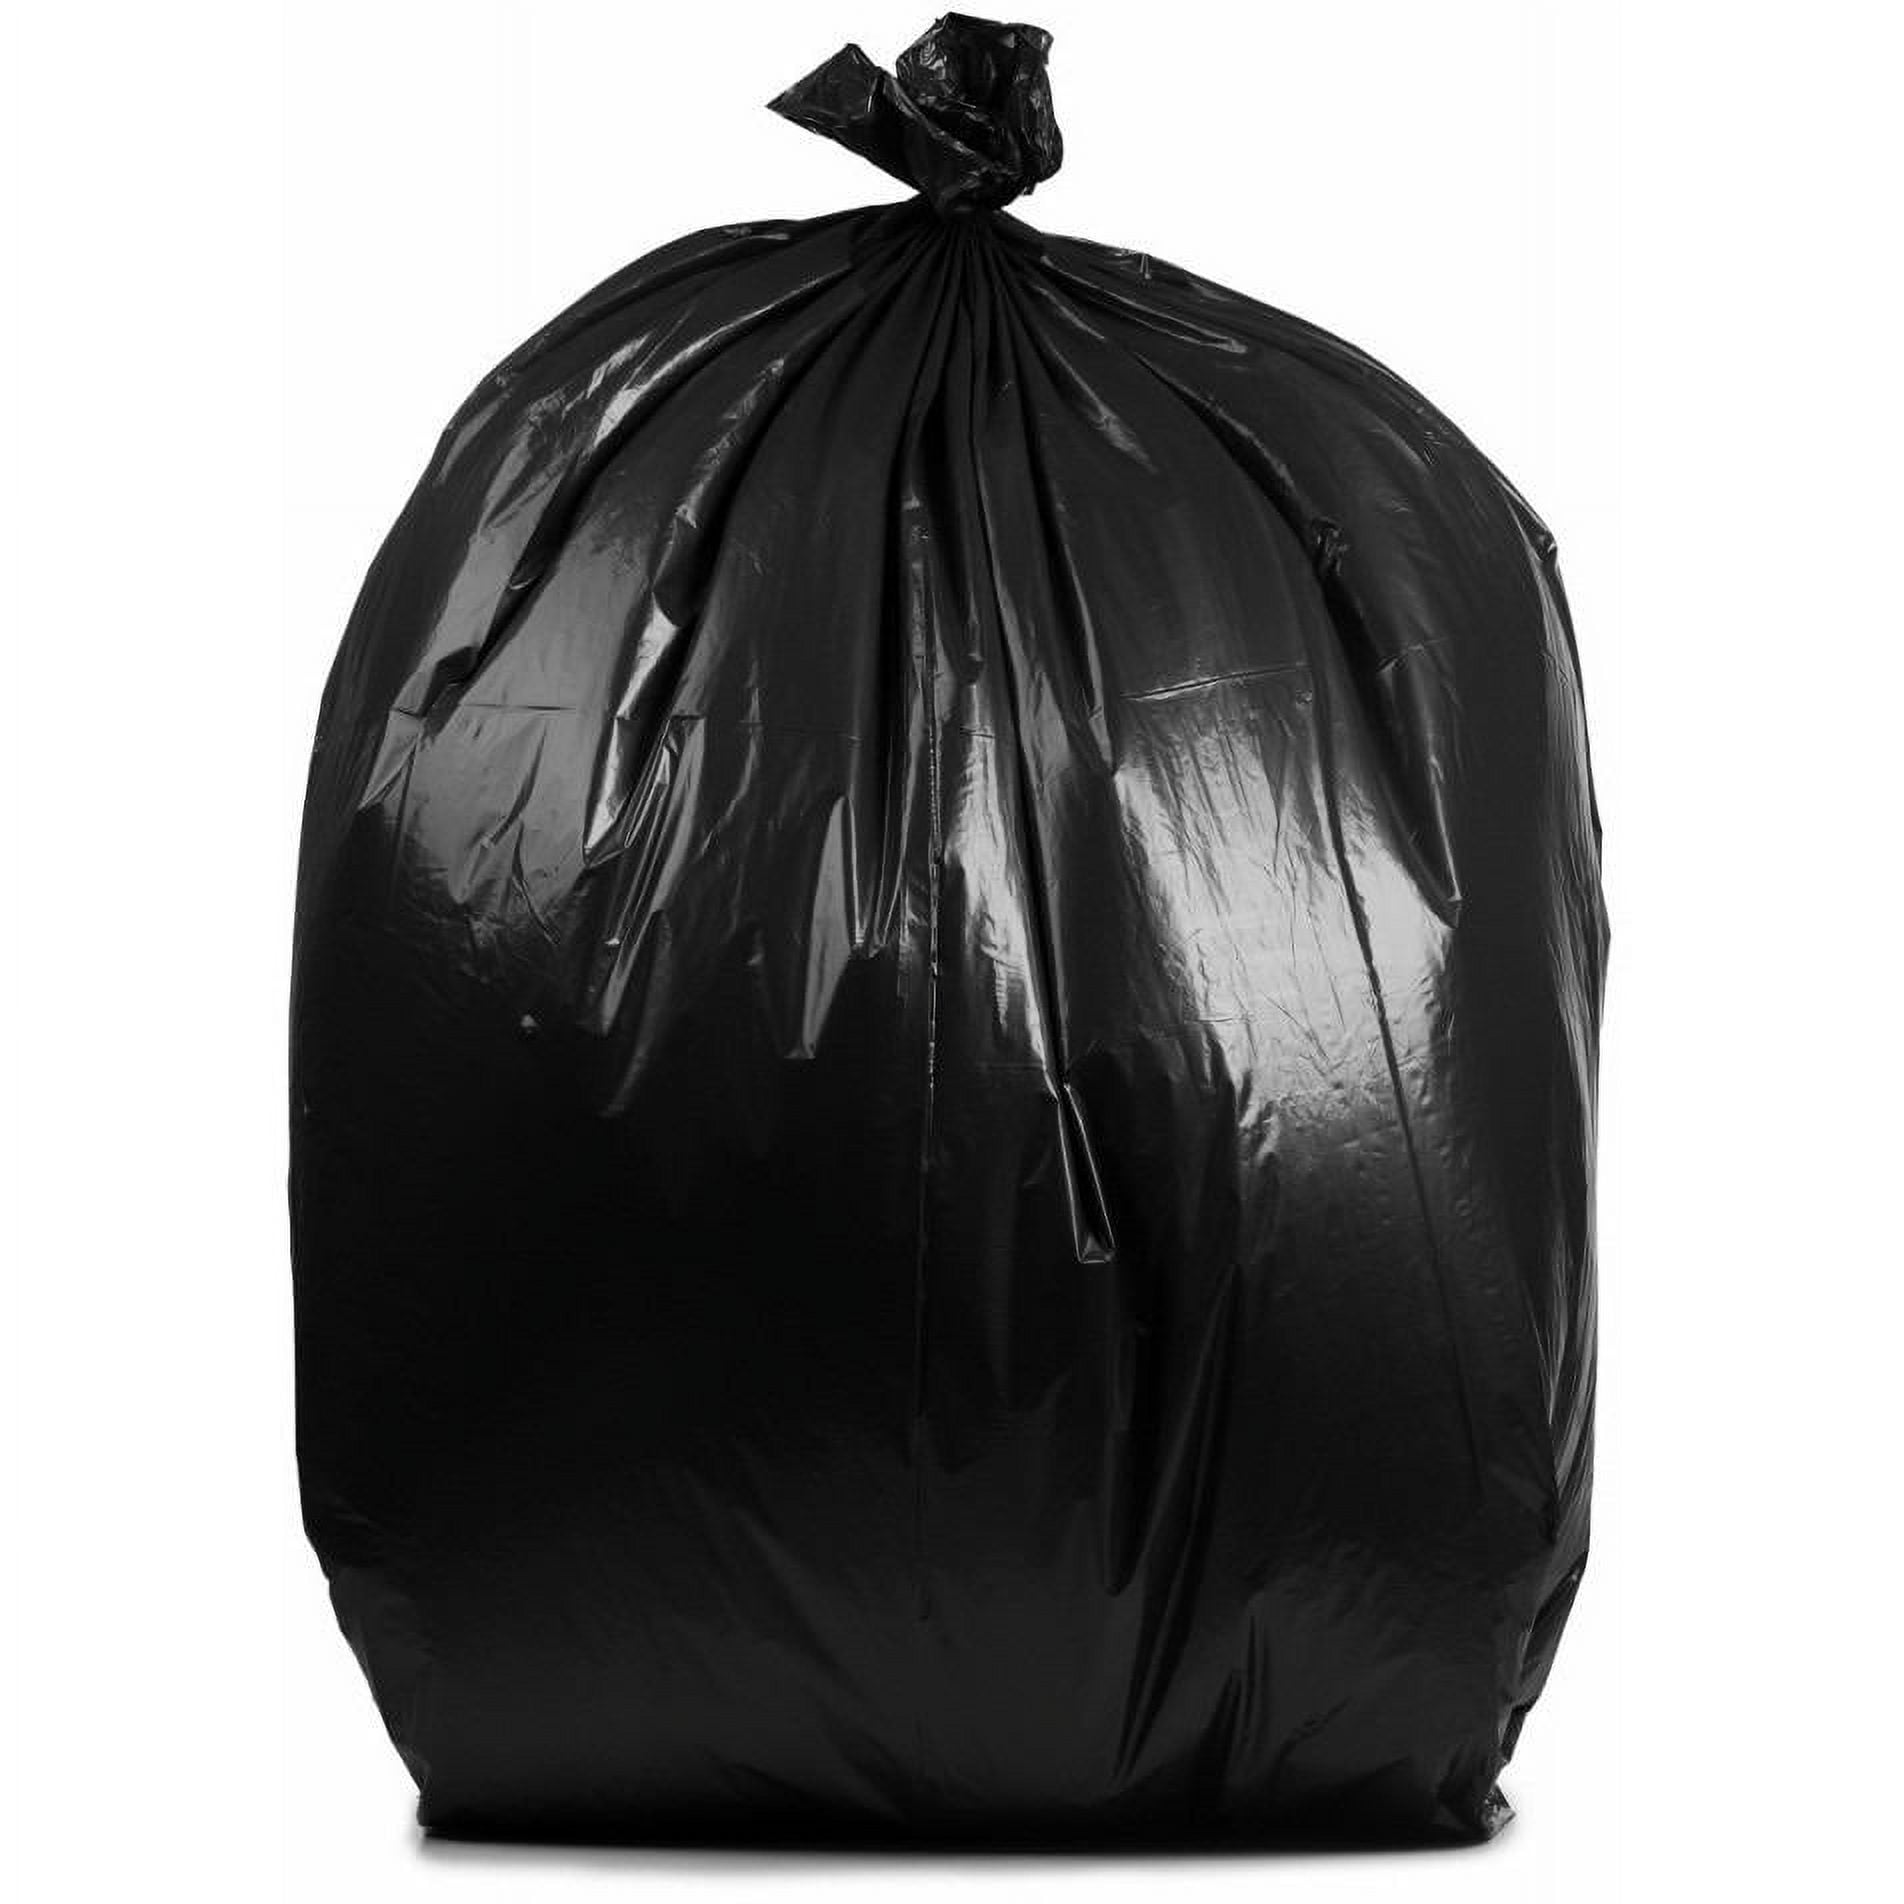 Plasticplace 20 Gal. to 30 Gal. Black Trash Bags (Case of 125